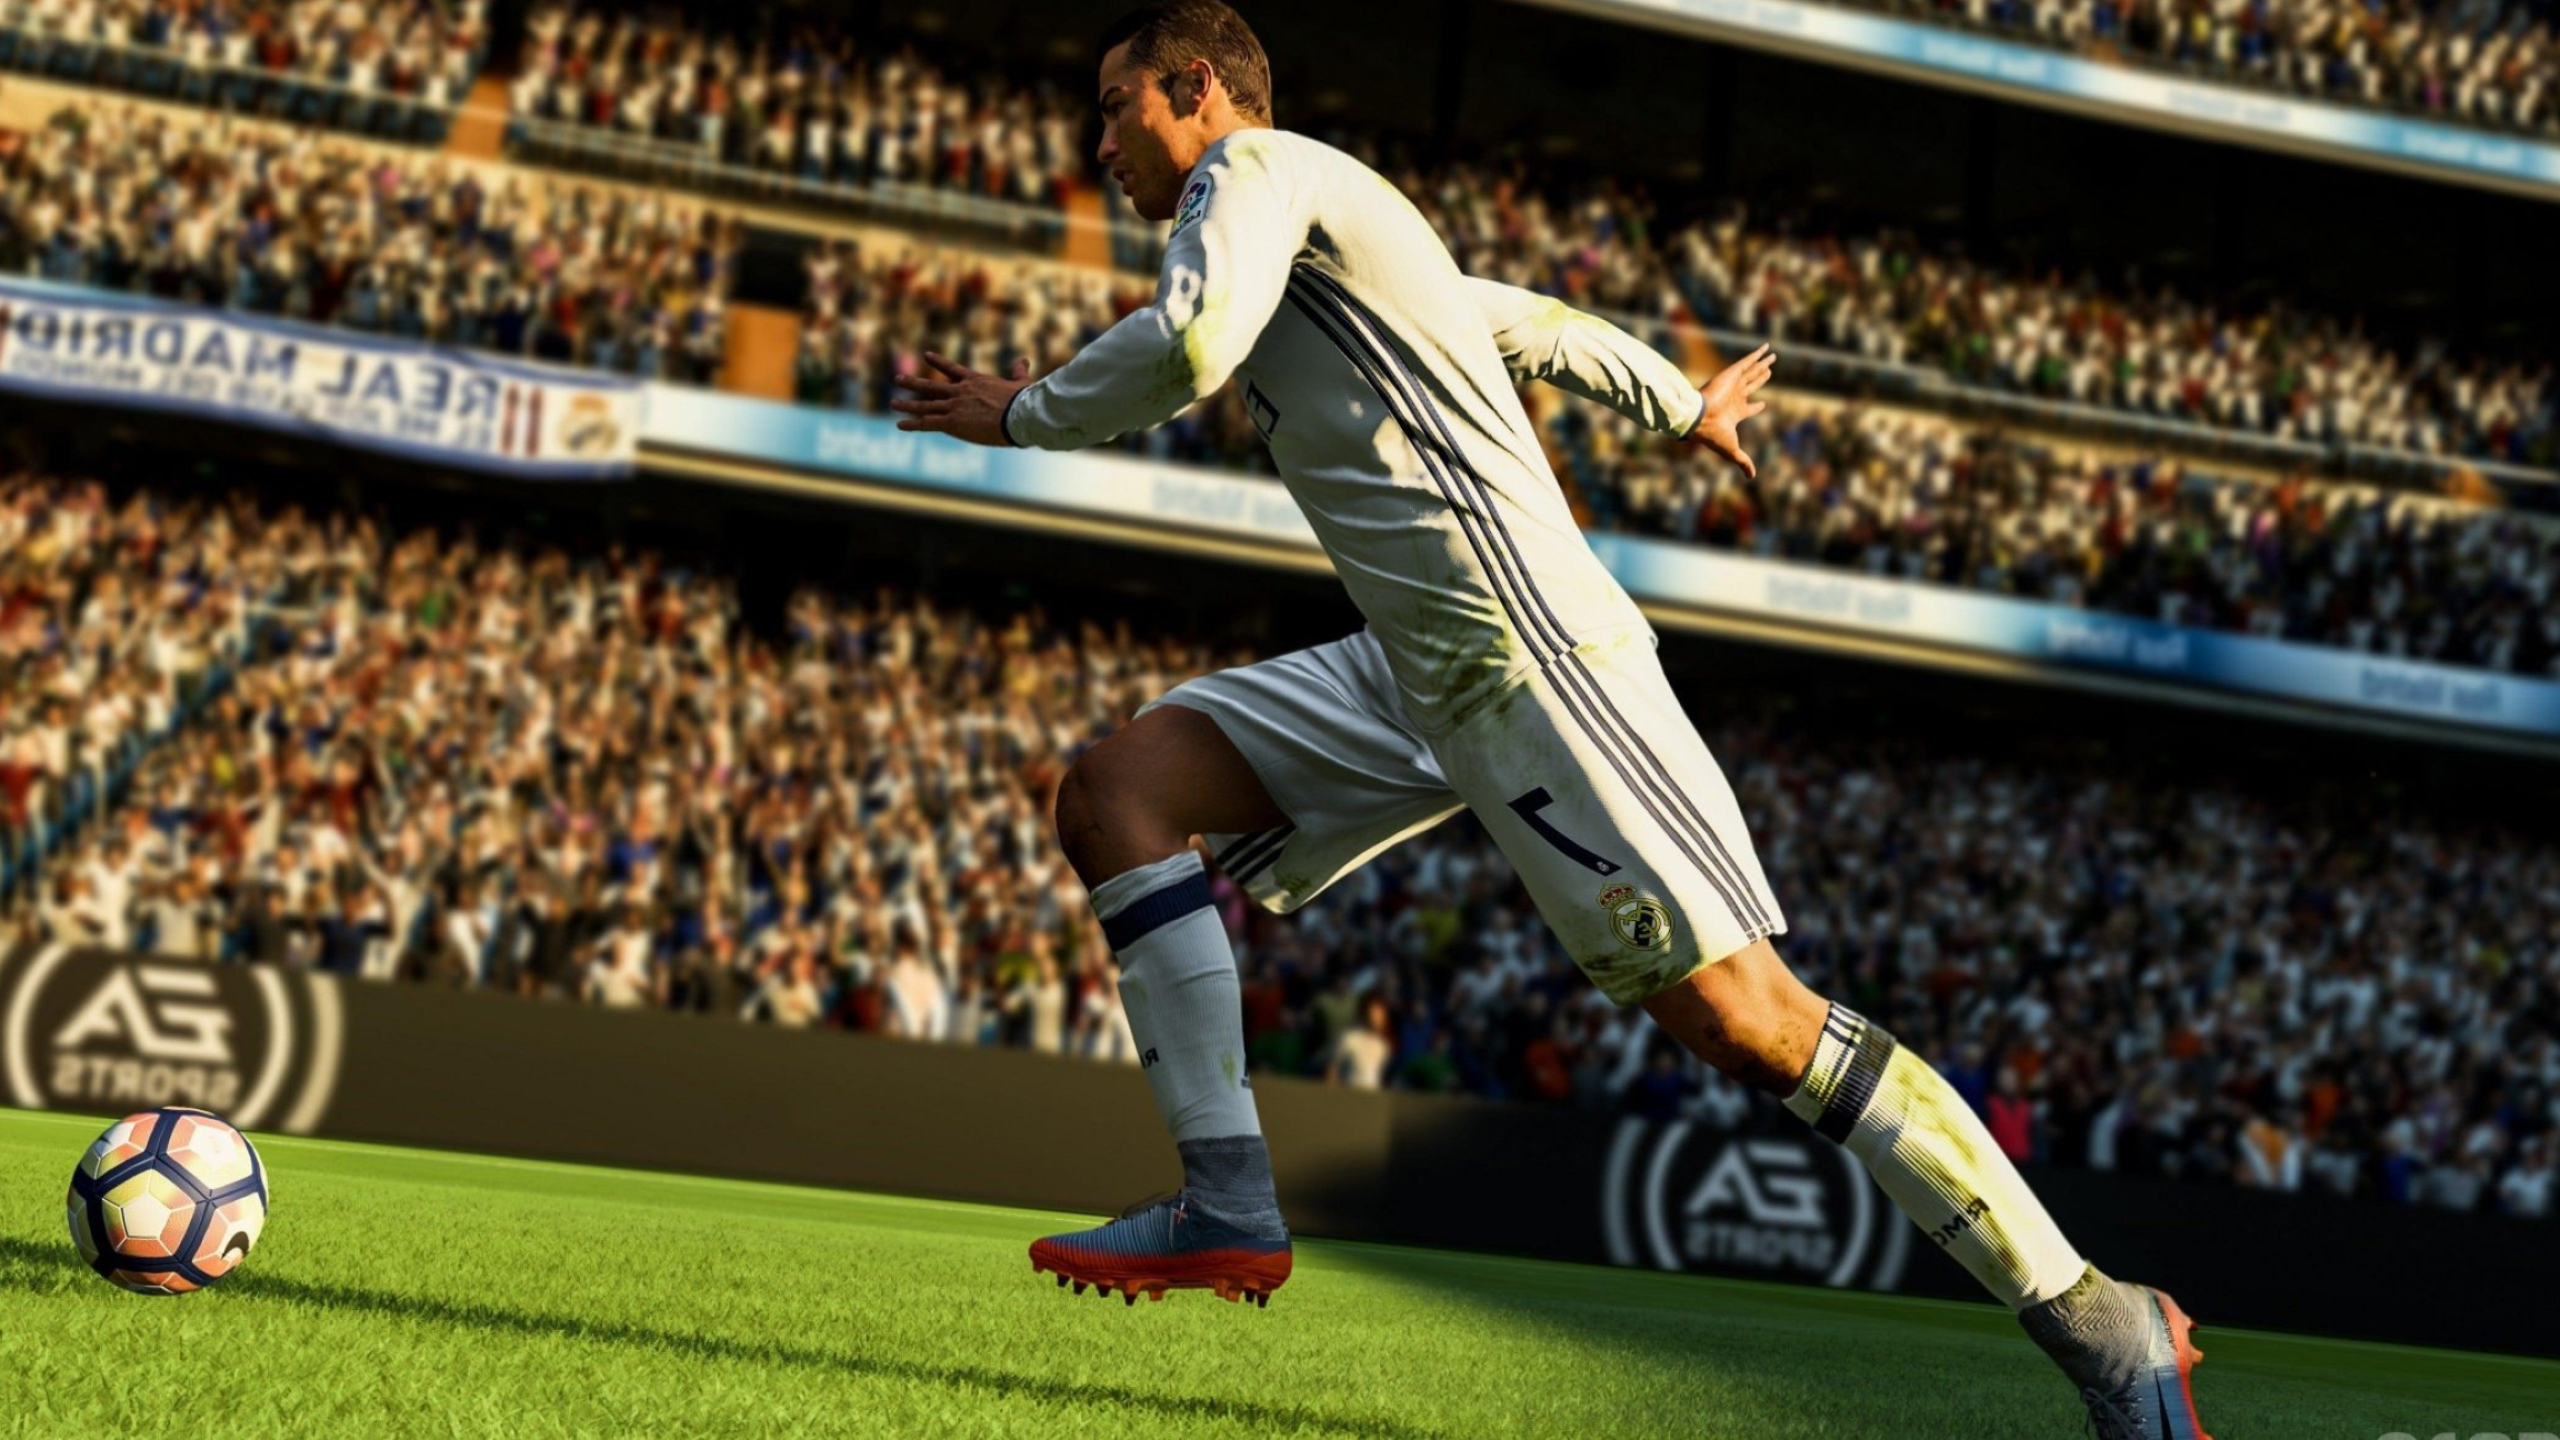 FIFA Soccer (Game): The 29th installment in the series, HyperMotion Technology. 2560x1440 HD Background.